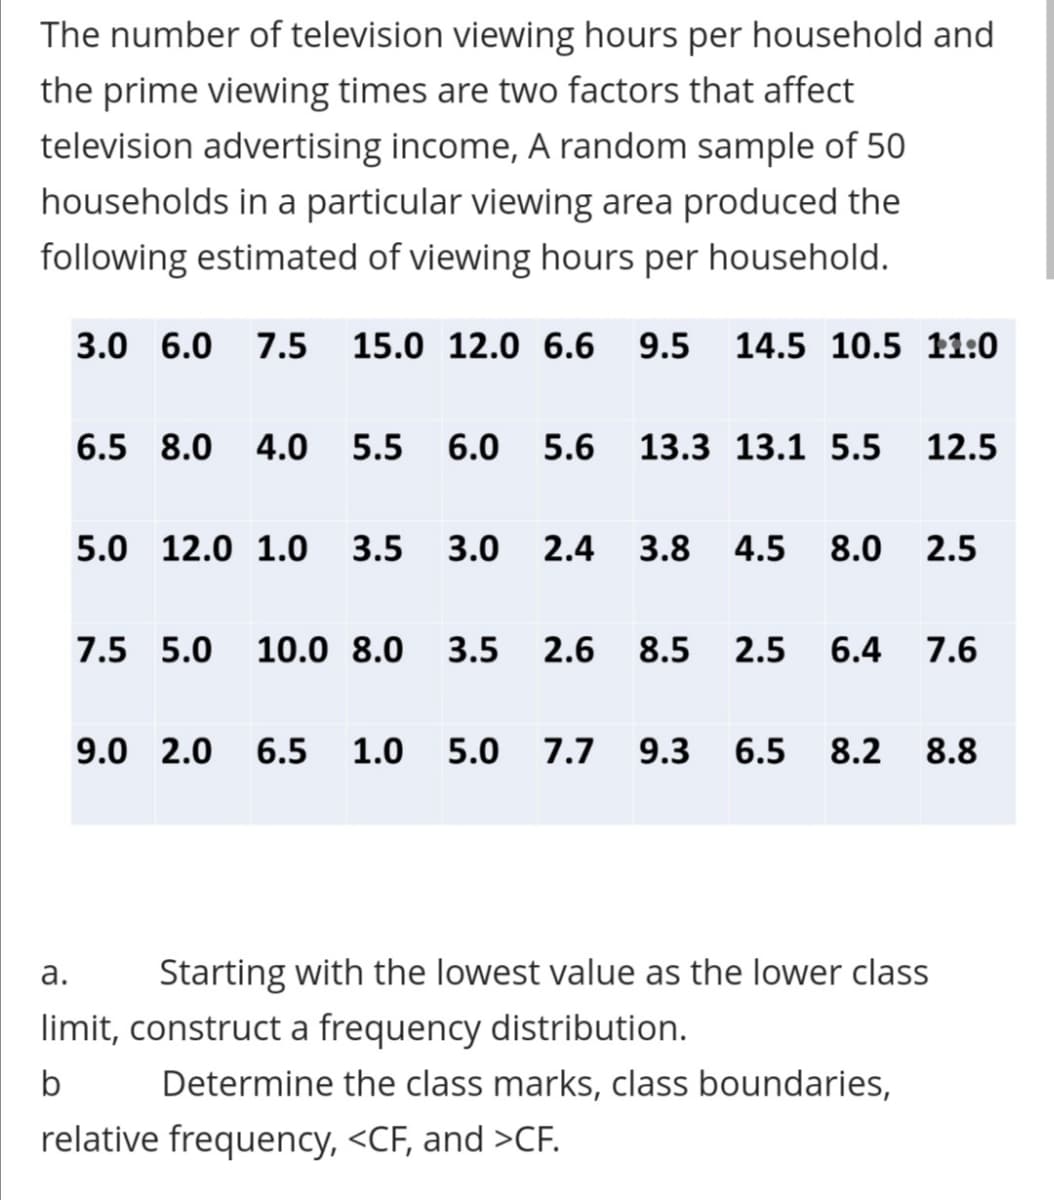 The number of television viewing hours per household and
the prime viewing times are two factors that affect
television advertising income, A random sample of 50
households in a particular viewing area produced the
following estimated of viewing hours per household.
3.0 6.0 7.5 15.0 12.0 6.6
9.5 14.5 10.5 11:0
6.5 8.0
4.0
5.5
6.0
5.6
13.3 13.1 5.5
12.5
5.0 12.0 1.0 3.5
3.0
2.4
3.8
4.5
8.0
2.5
7.5 5.0
10.0 8.0
3.5
2.6
8.5
2.5
6.4
7.6
9.0 2.0 6.5 1.0 5.0
7.7
9.3
6.5
8.2
8.8
а.
Starting with the lowest value as the lower class
limit, construct a frequency distribution.
b
Determine the class marks, class boundaries,
relative frequency, <CF, and >CF.
